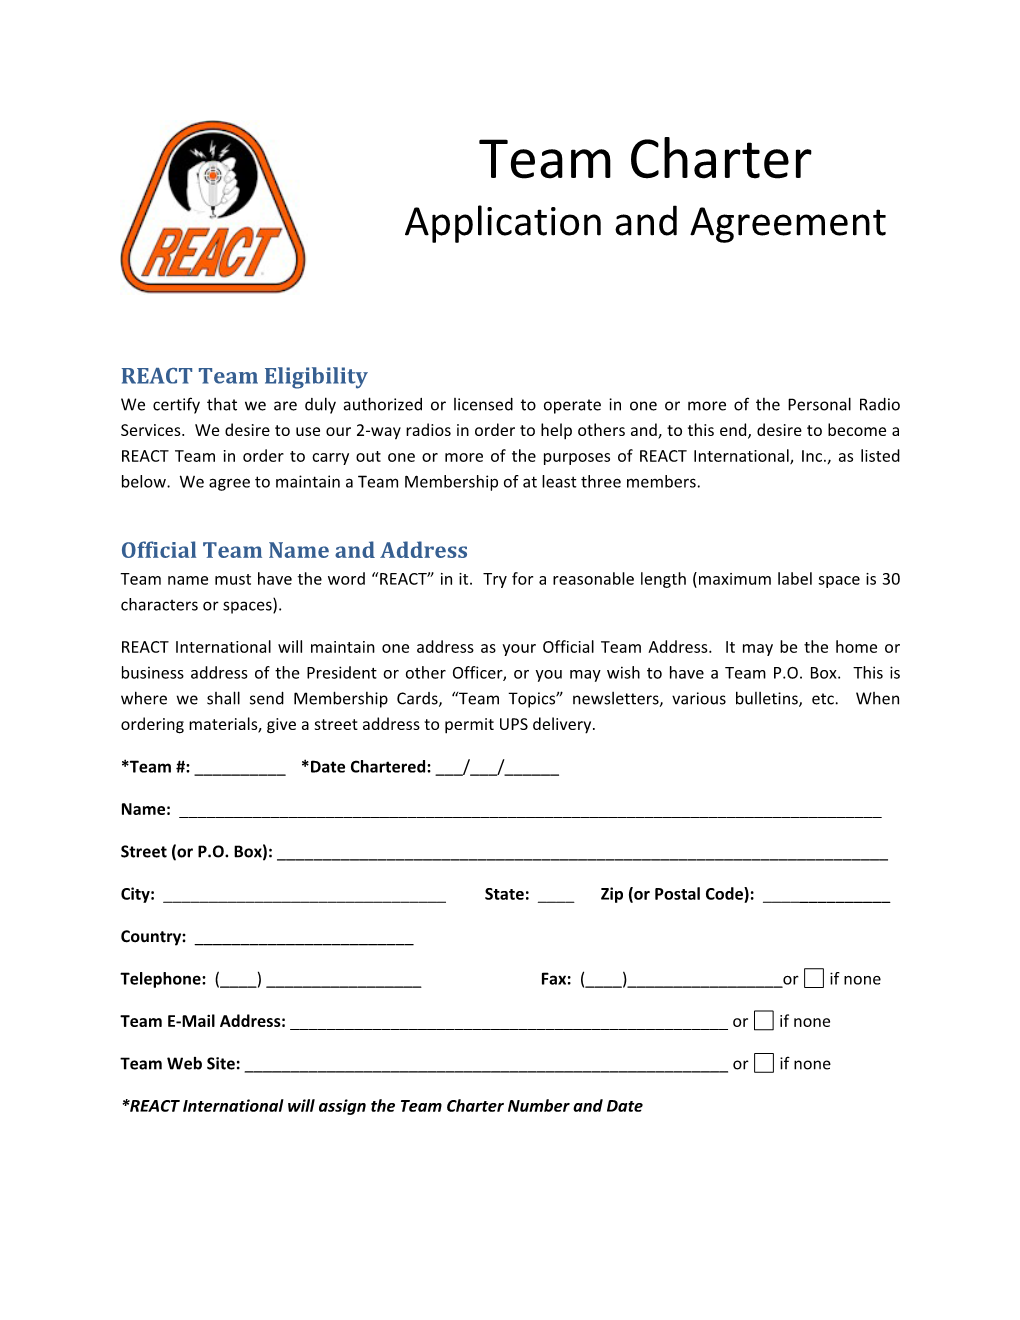 Team Charter Application and Agreement